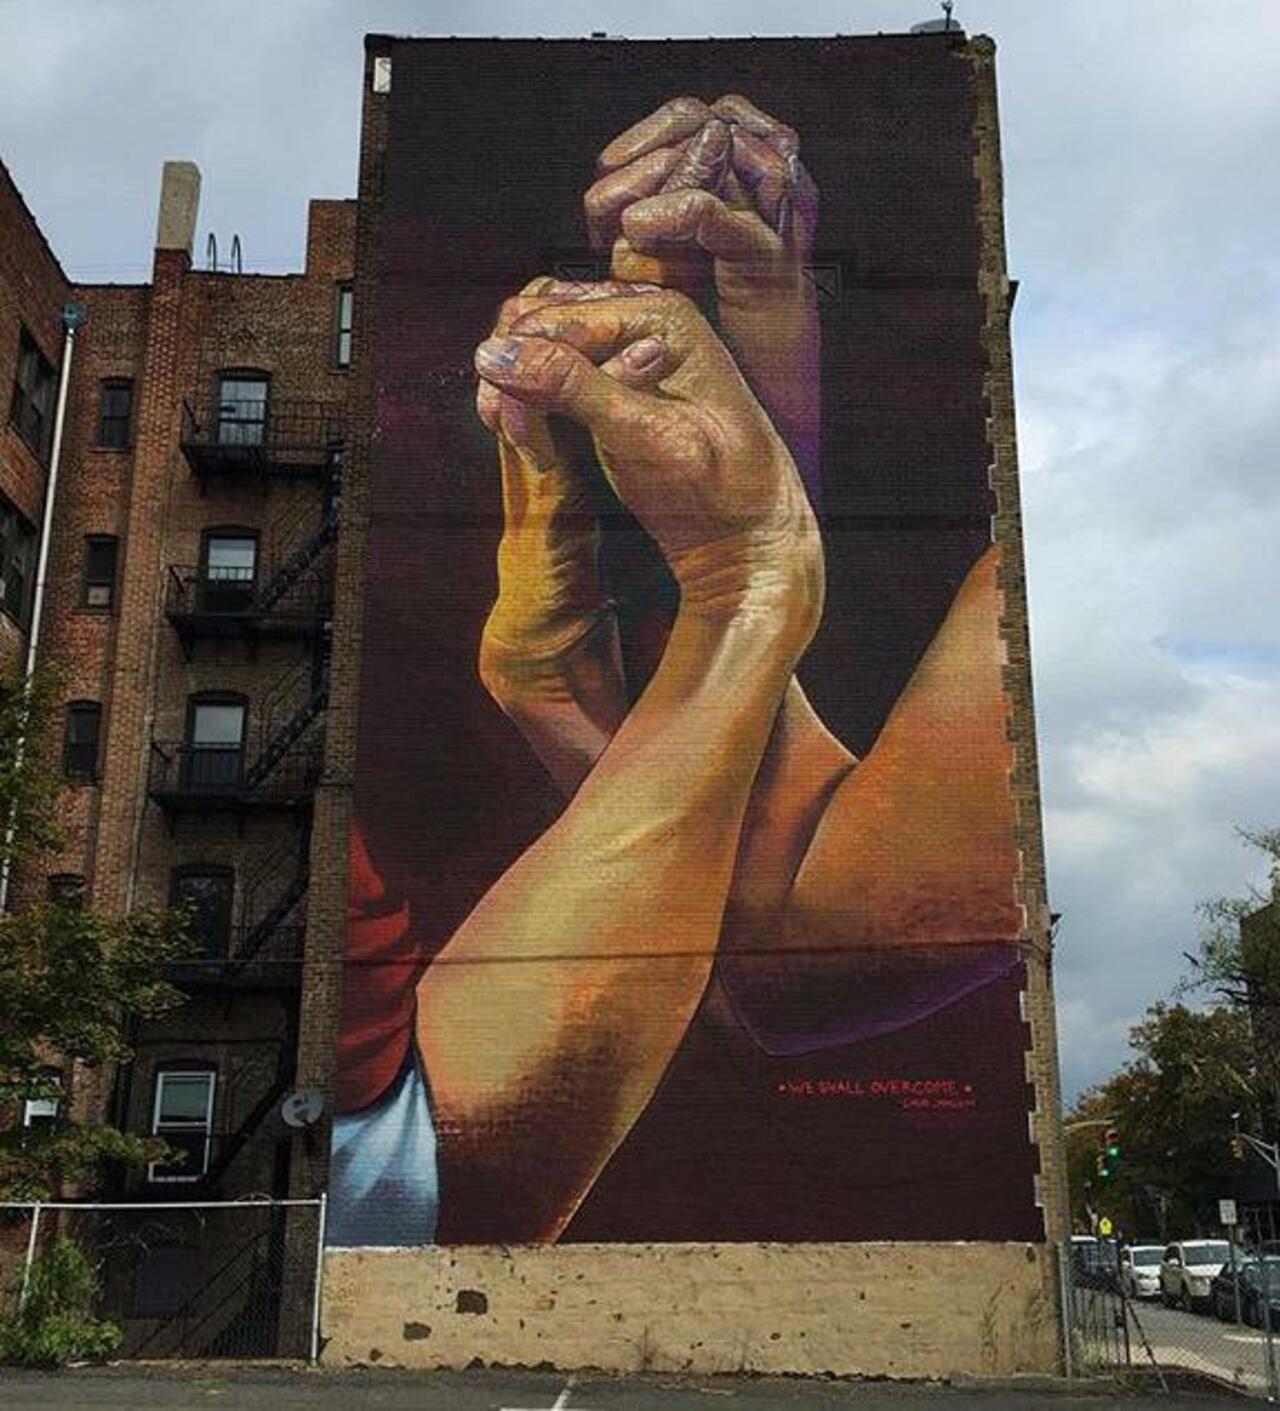 New Street Art by CaseMaclaim in Jersey City for the TheBKcollective 

#art #graffiti #mural #streetart http://t.co/7Pi58aN9Fs